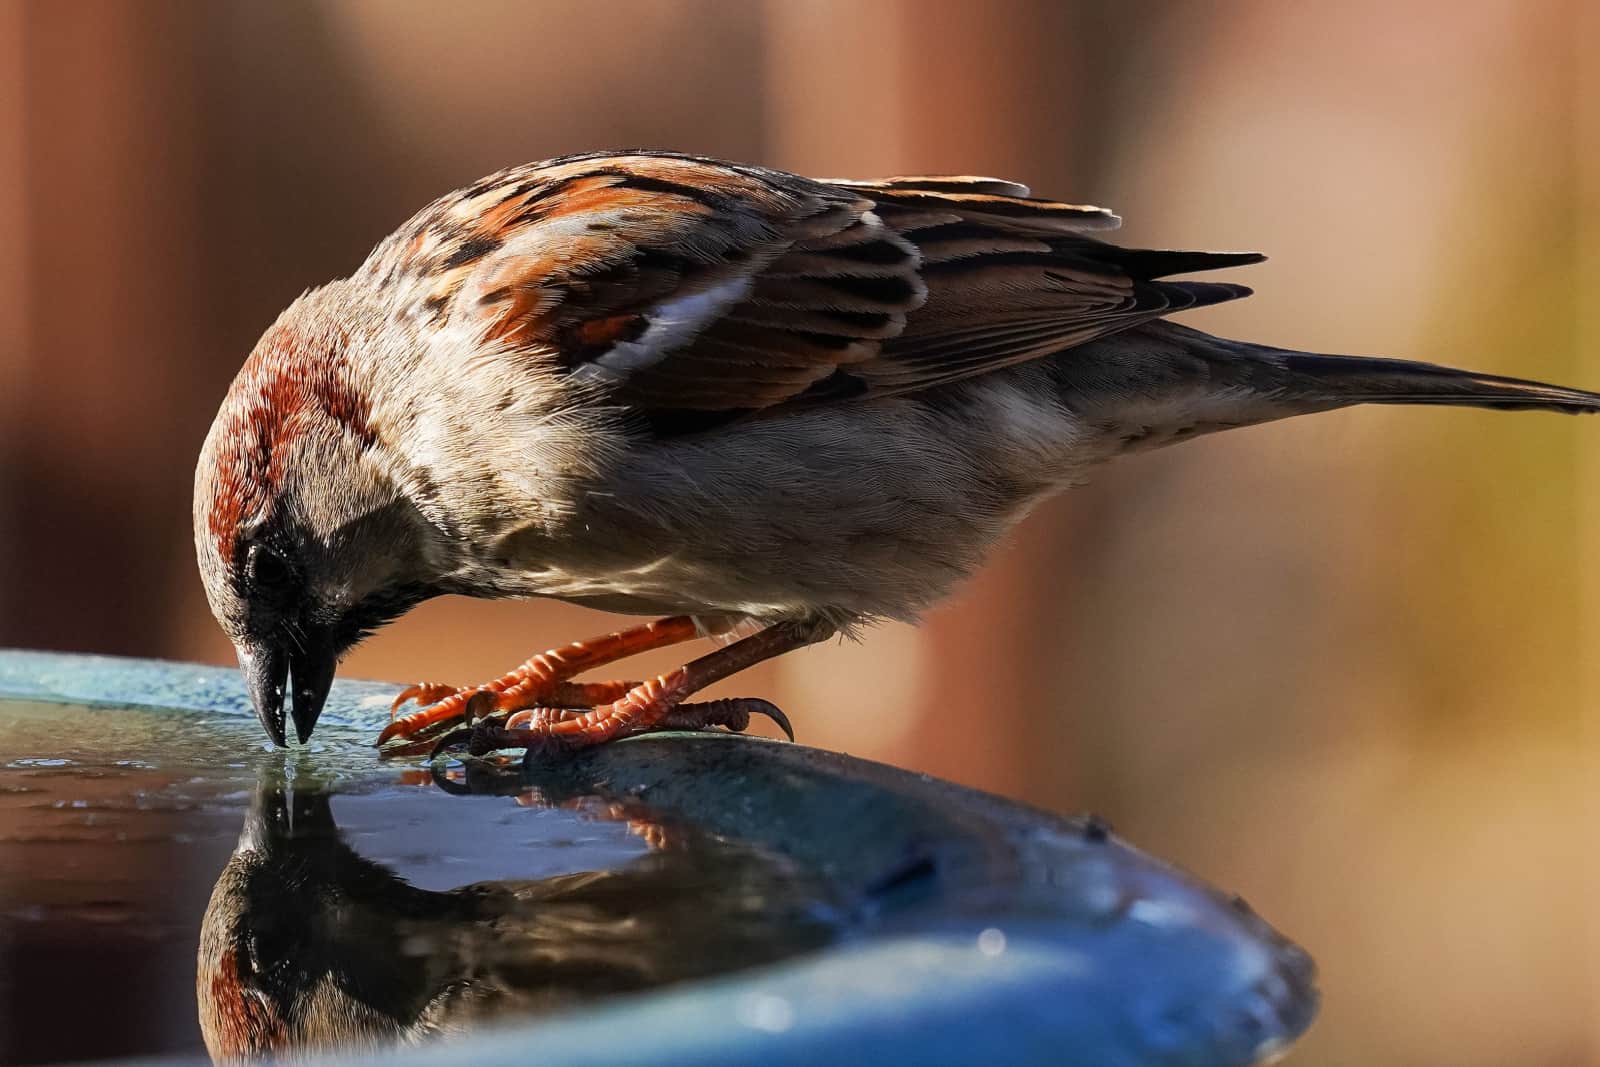 Sparrow checks its reflection in an icy fountain